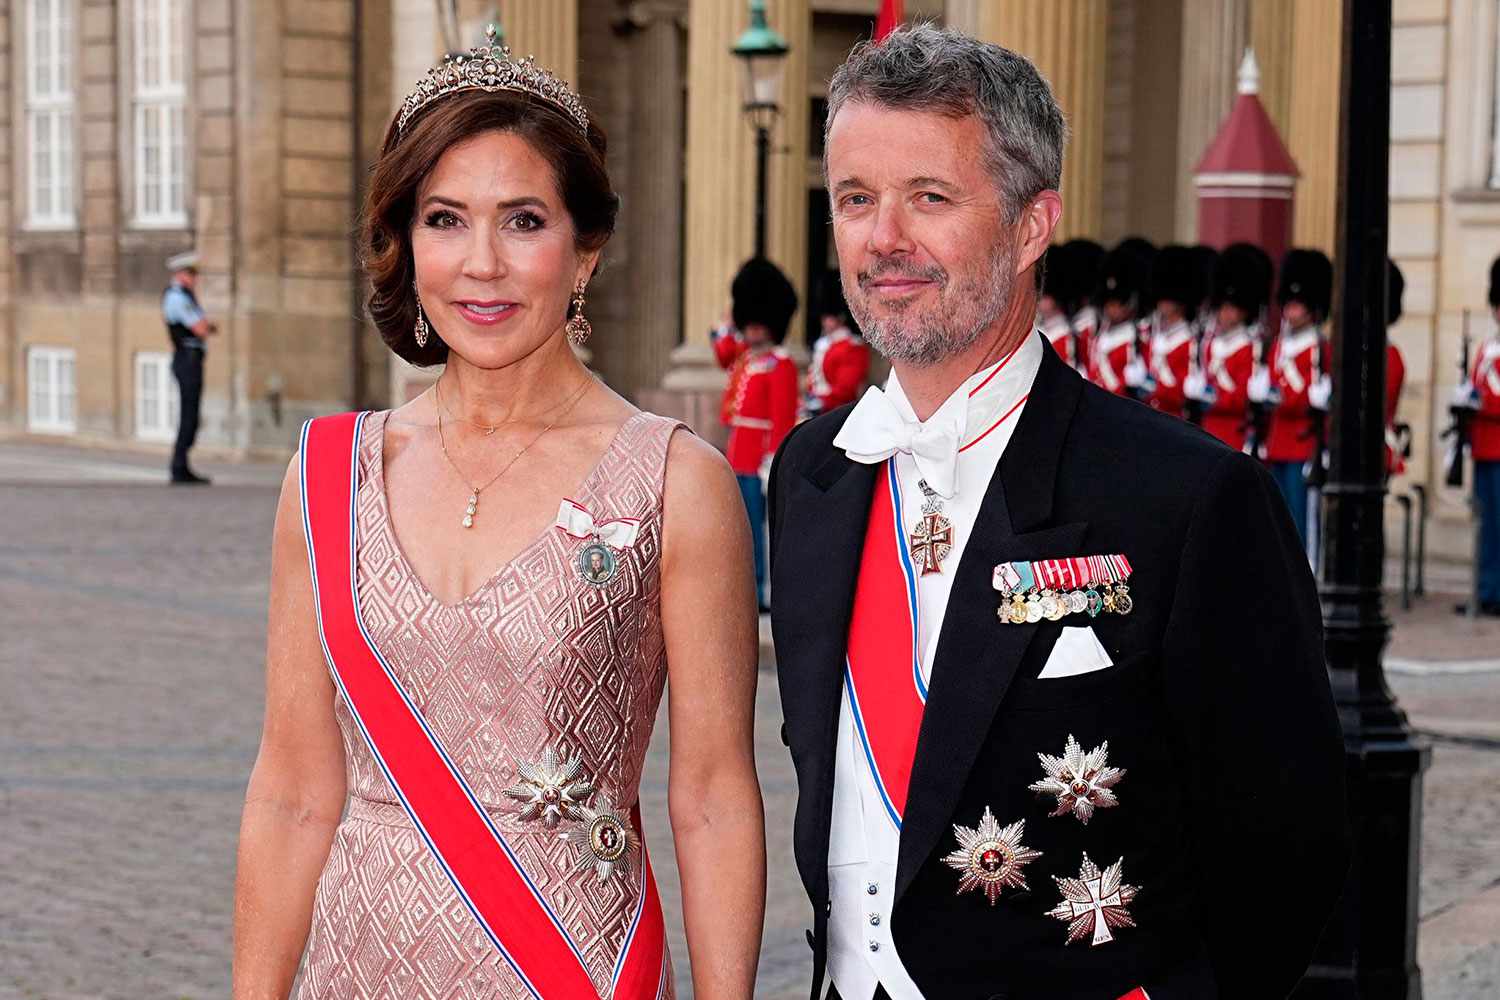 Denmark's Crown Prince Frederik and Denmark's Crown Princess Mary arrive ahead of a dinner at Amalienborg Castle in Copenhagen, on June 15, 2023. (Photo by Mads Claus Rasmussen / Ritzau Scanpix / AFP) / Denmark OUT (Photo by MADS CLAUS RASMUSSEN/Ritzau Scanpix/AFP via Getty Images)